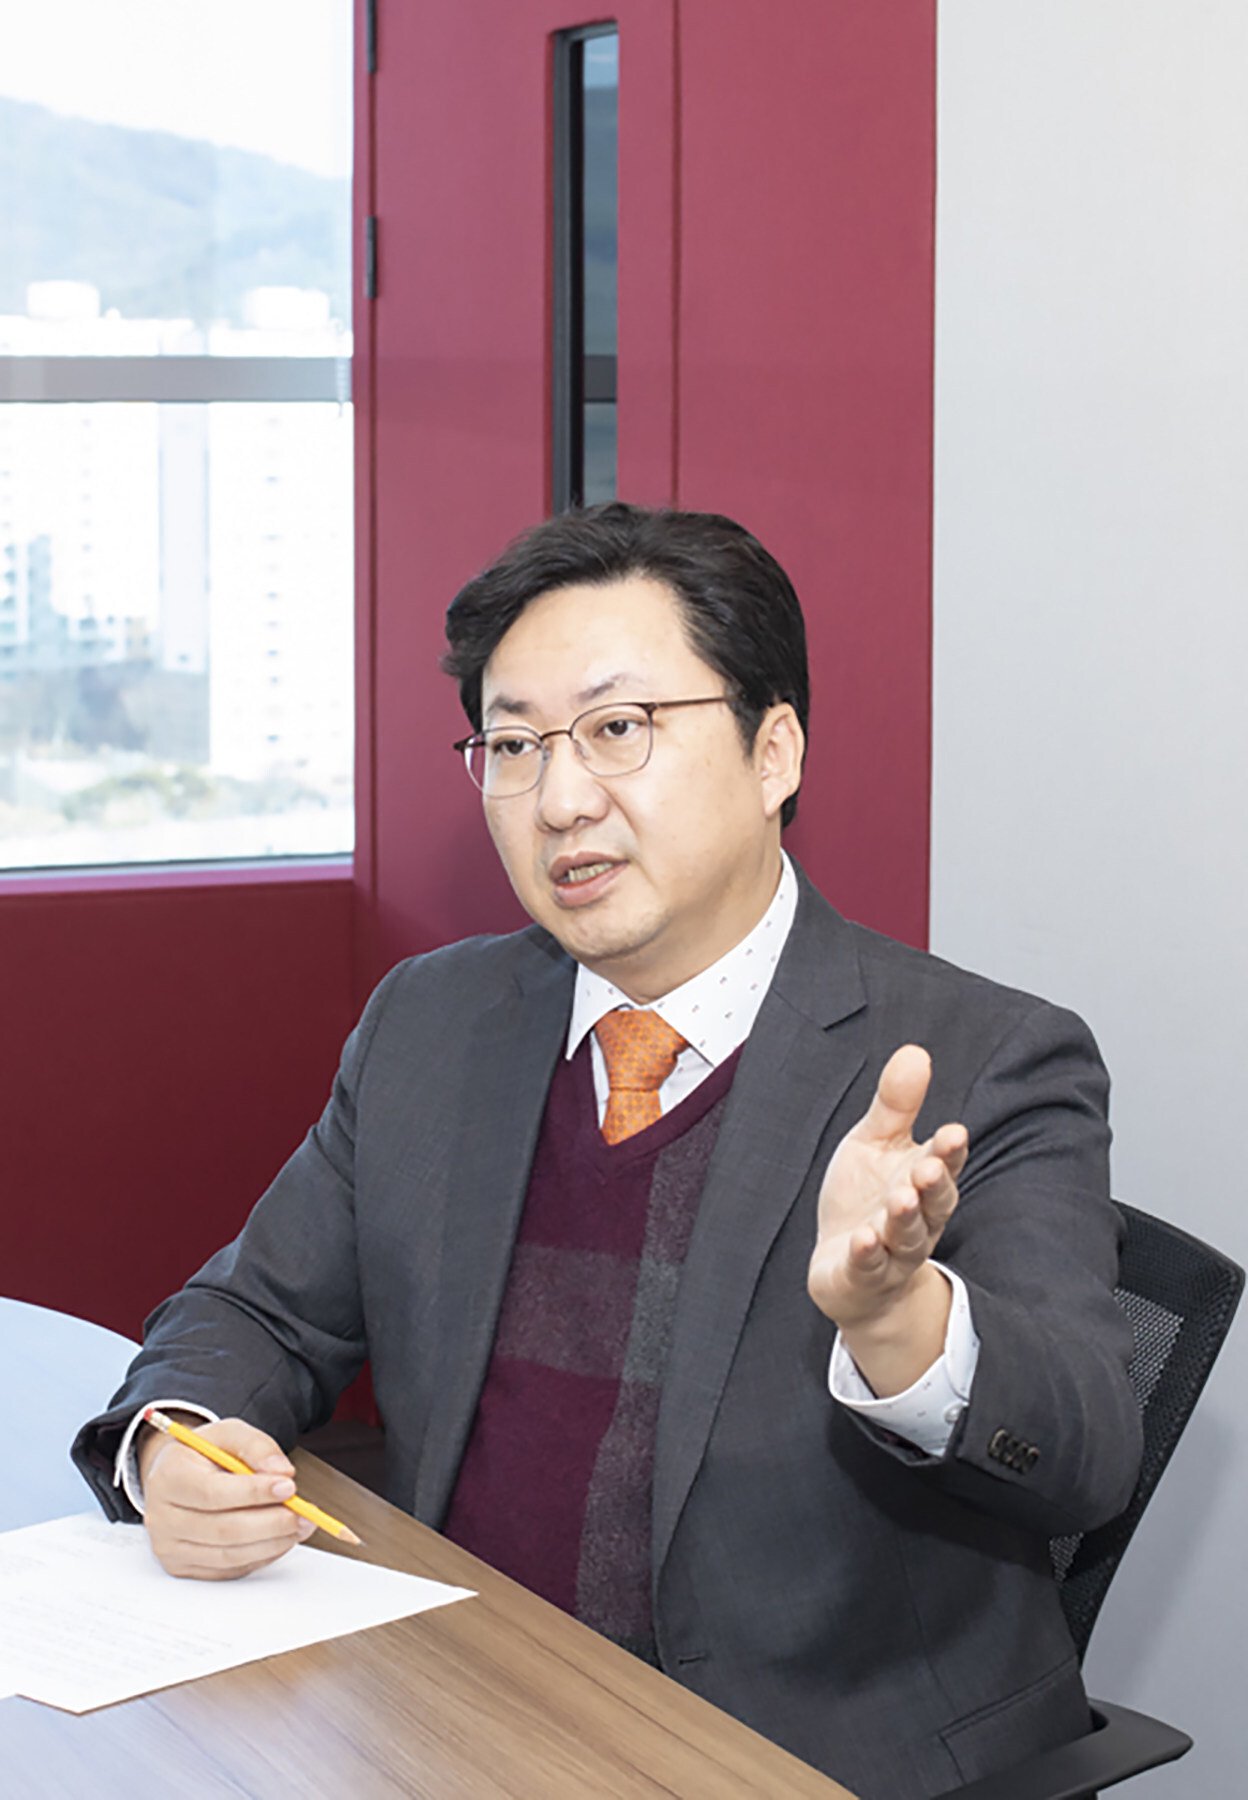 Dr Lee Dong-ki, founder and CEO